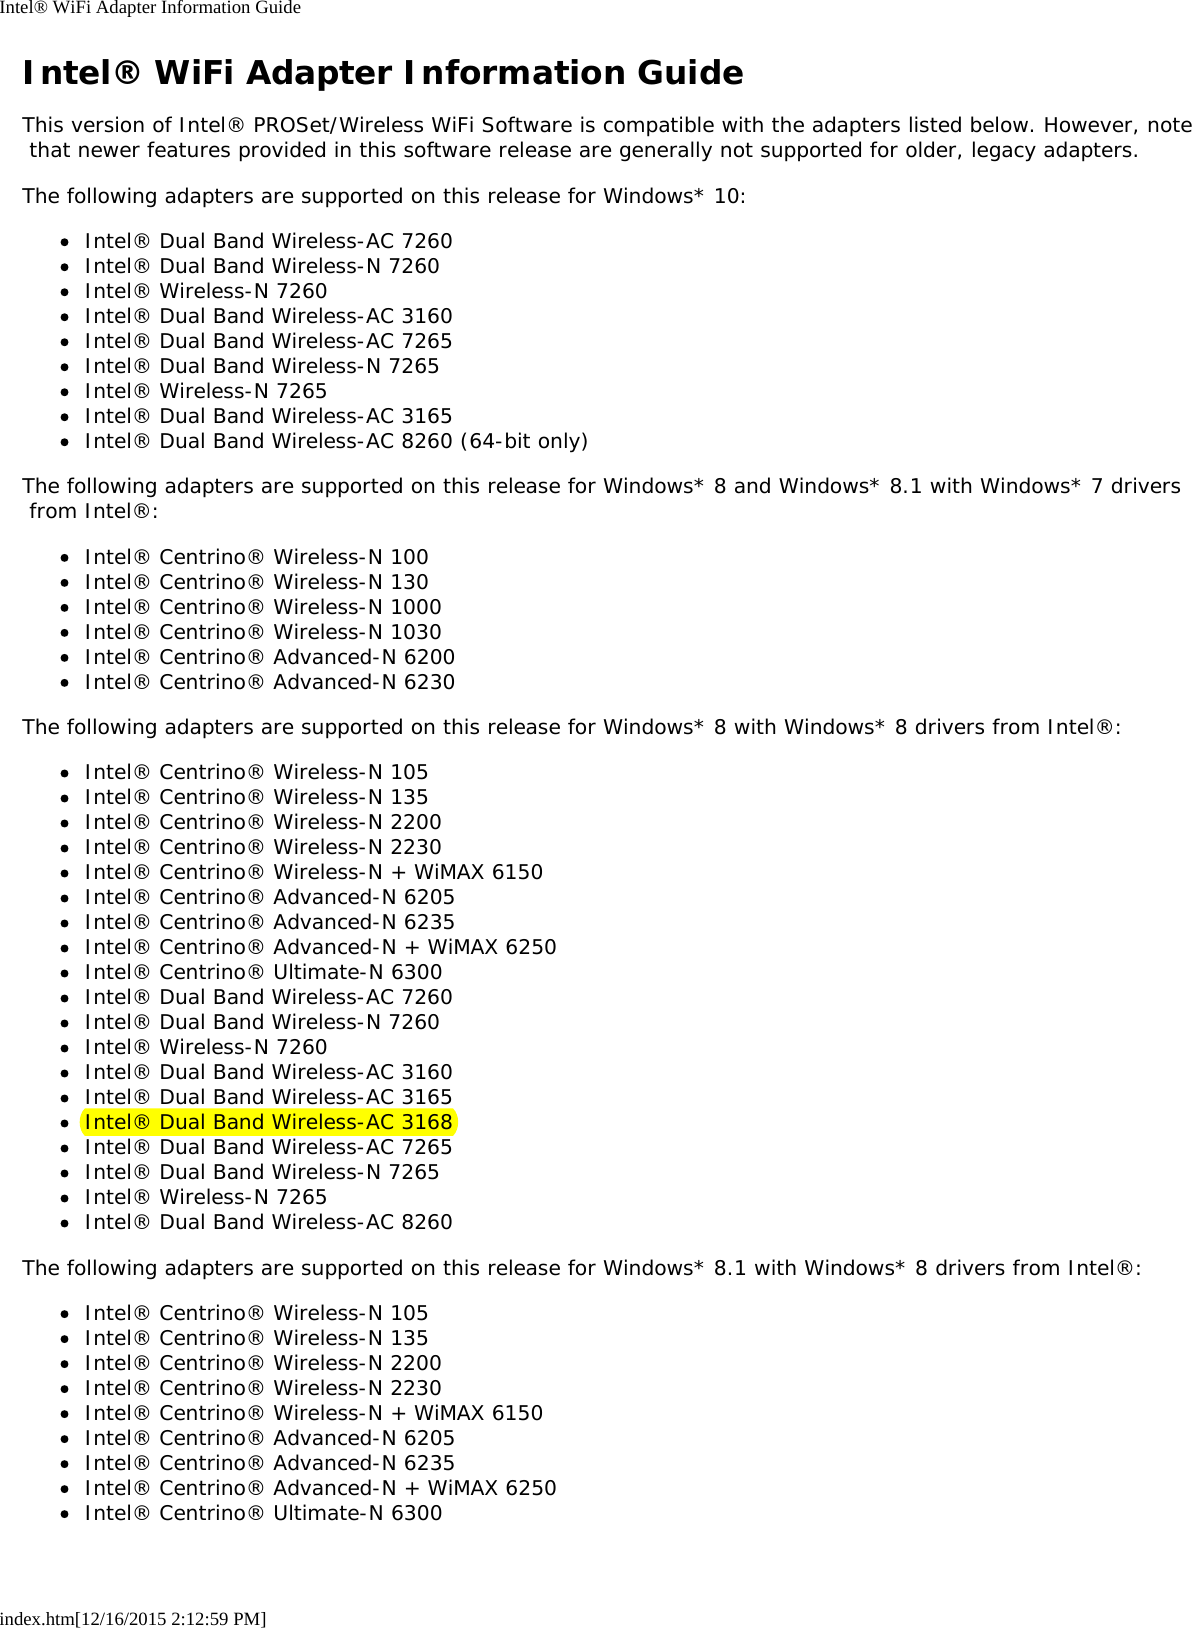 Intel® WiFi Adapter Information Guideindex.htm[12/16/2015 2:12:59 PM]Intel® WiFi Adapter Information GuideThis version of Intel® PROSet/Wireless WiFi Software is compatible with the adapters listed below. However, note that newer features provided in this software release are generally not supported for older, legacy adapters.The following adapters are supported on this release for Windows* 10:Intel® Dual Band Wireless-AC 7260Intel® Dual Band Wireless-N 7260Intel® Wireless-N 7260Intel® Dual Band Wireless-AC 3160Intel® Dual Band Wireless-AC 7265Intel® Dual Band Wireless-N 7265Intel® Wireless-N 7265Intel® Dual Band Wireless-AC 3165Intel® Dual Band Wireless-AC 8260 (64-bit only)The following adapters are supported on this release for Windows* 8 and Windows* 8.1 with Windows* 7 drivers from Intel®:Intel® Centrino® Wireless-N 100Intel® Centrino® Wireless-N 130Intel® Centrino® Wireless-N 1000Intel® Centrino® Wireless-N 1030Intel® Centrino® Advanced-N 6200Intel® Centrino® Advanced-N 6230The following adapters are supported on this release for Windows* 8 with Windows* 8 drivers from Intel®:Intel® Centrino® Wireless-N 105Intel® Centrino® Wireless-N 135Intel® Centrino® Wireless-N 2200Intel® Centrino® Wireless-N 2230Intel® Centrino® Wireless-N + WiMAX 6150Intel® Centrino® Advanced-N 6205Intel® Centrino® Advanced-N 6235Intel® Centrino® Advanced-N + WiMAX 6250Intel® Centrino® Ultimate-N 6300Intel® Dual Band Wireless-AC 7260Intel® Dual Band Wireless-N 7260Intel® Wireless-N 7260Intel® Dual Band Wireless-AC 3160Intel® Dual Band Wireless-AC 3165Intel® Dual Band Wireless-AC 3168Intel® Dual Band Wireless-AC 7265Intel® Dual Band Wireless-N 7265Intel® Wireless-N 7265Intel® Dual Band Wireless-AC 8260The following adapters are supported on this release for Windows* 8.1 with Windows* 8 drivers from Intel®:Intel® Centrino® Wireless-N 105Intel® Centrino® Wireless-N 135Intel® Centrino® Wireless-N 2200Intel® Centrino® Wireless-N 2230Intel® Centrino® Wireless-N + WiMAX 6150Intel® Centrino® Advanced-N 6205Intel® Centrino® Advanced-N 6235Intel® Centrino® Advanced-N + WiMAX 6250Intel® Centrino® Ultimate-N 6300